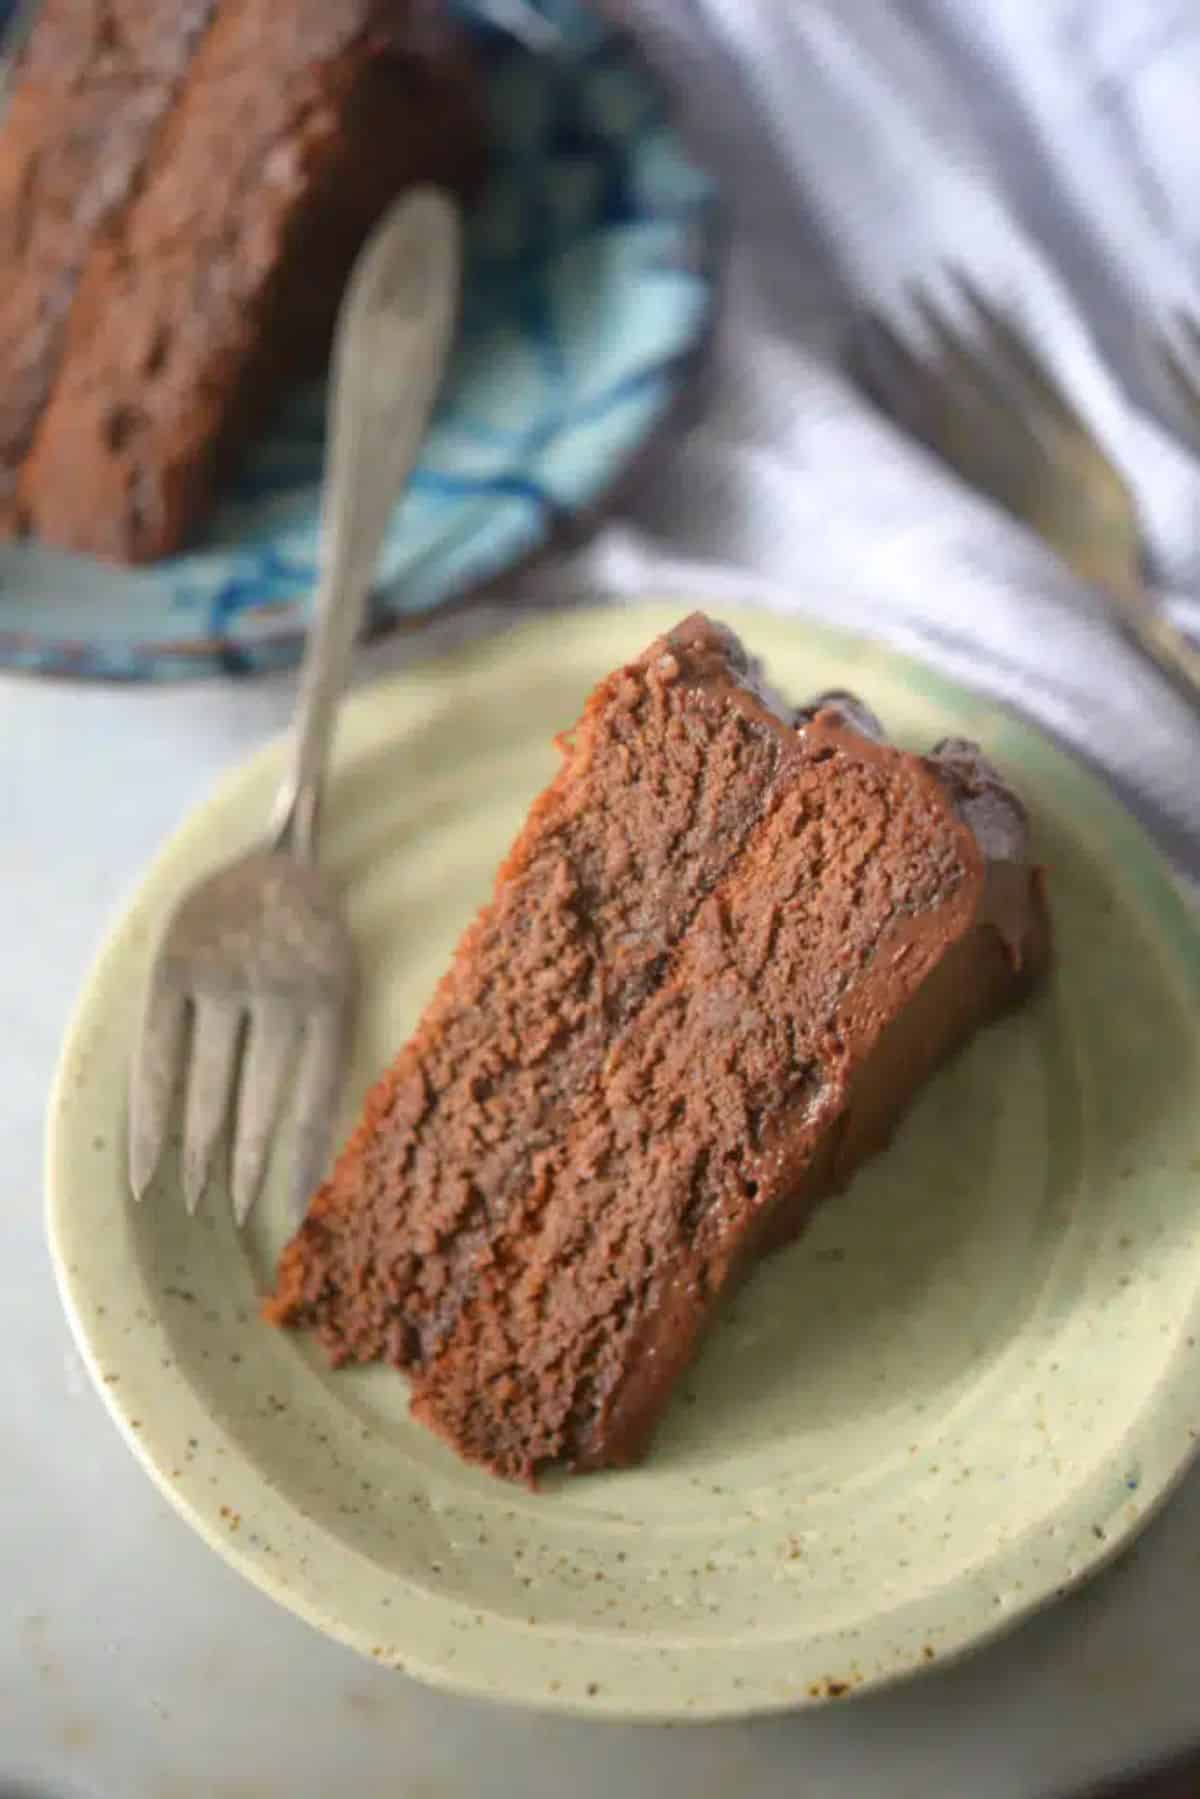 A piece of Coconut Flour Chocolate Cake on a green plate with a fork.